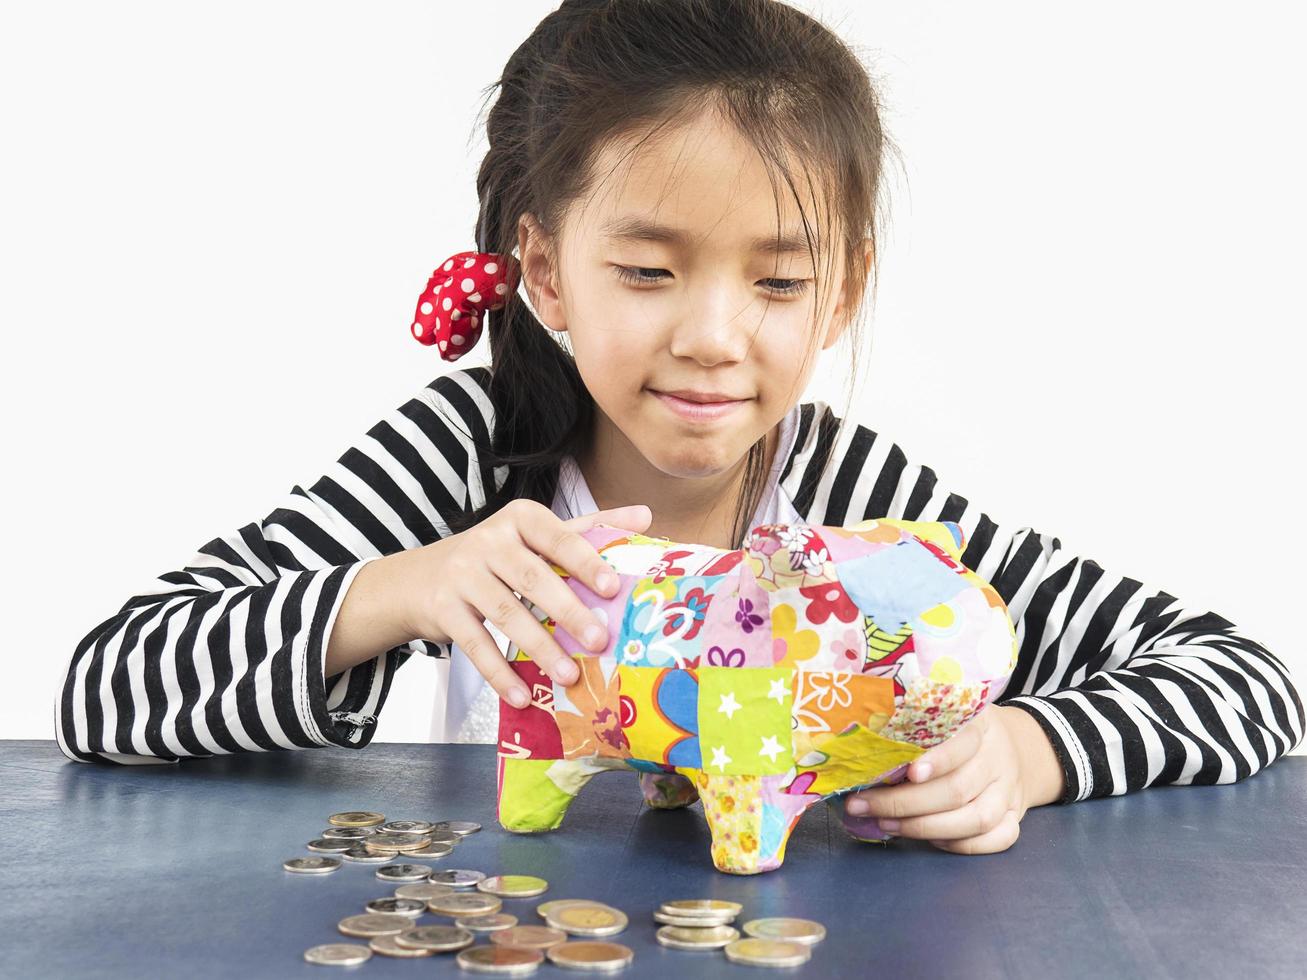 Asian kid is putting money in to a colorful piggy coin bank photo